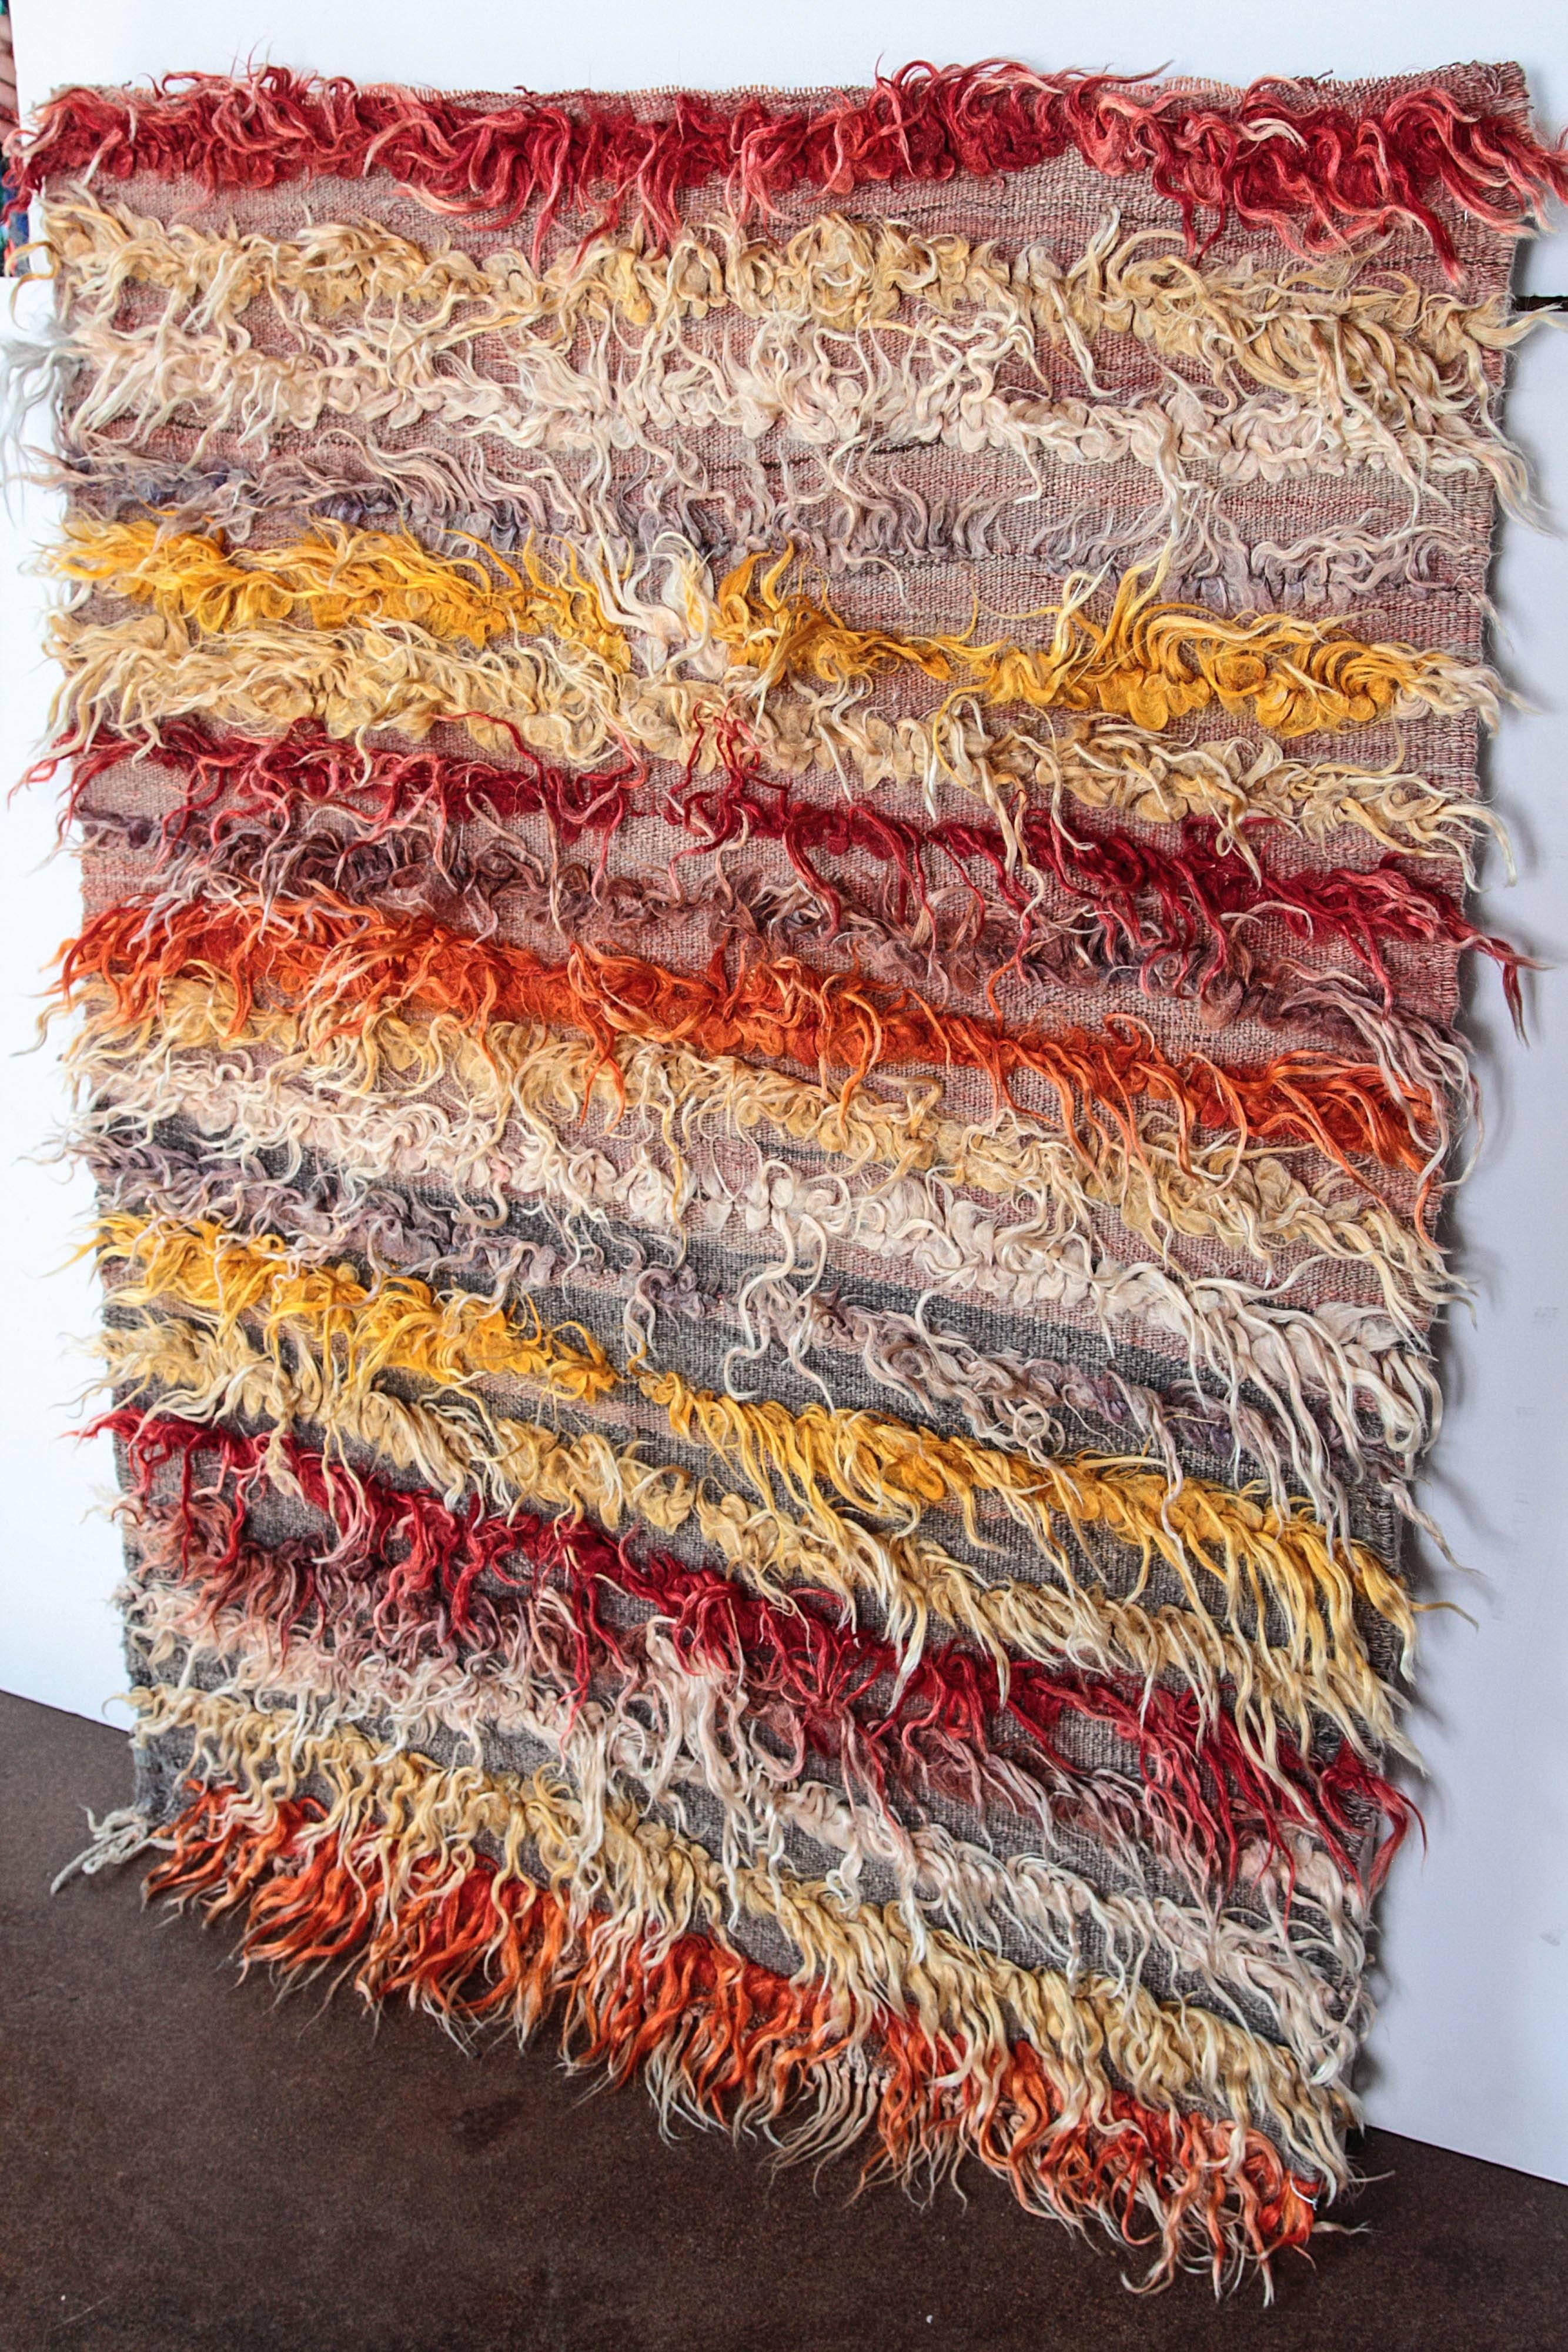 Tulu shaggy rug portrait
Vintage vibrant color Turkish Tulu shaggy rug with abstract design
Made from local angora type goats' wool hand-knotted on a woollen Kilim.
Tulus are handwoven in central turkey with extremely long angora wool